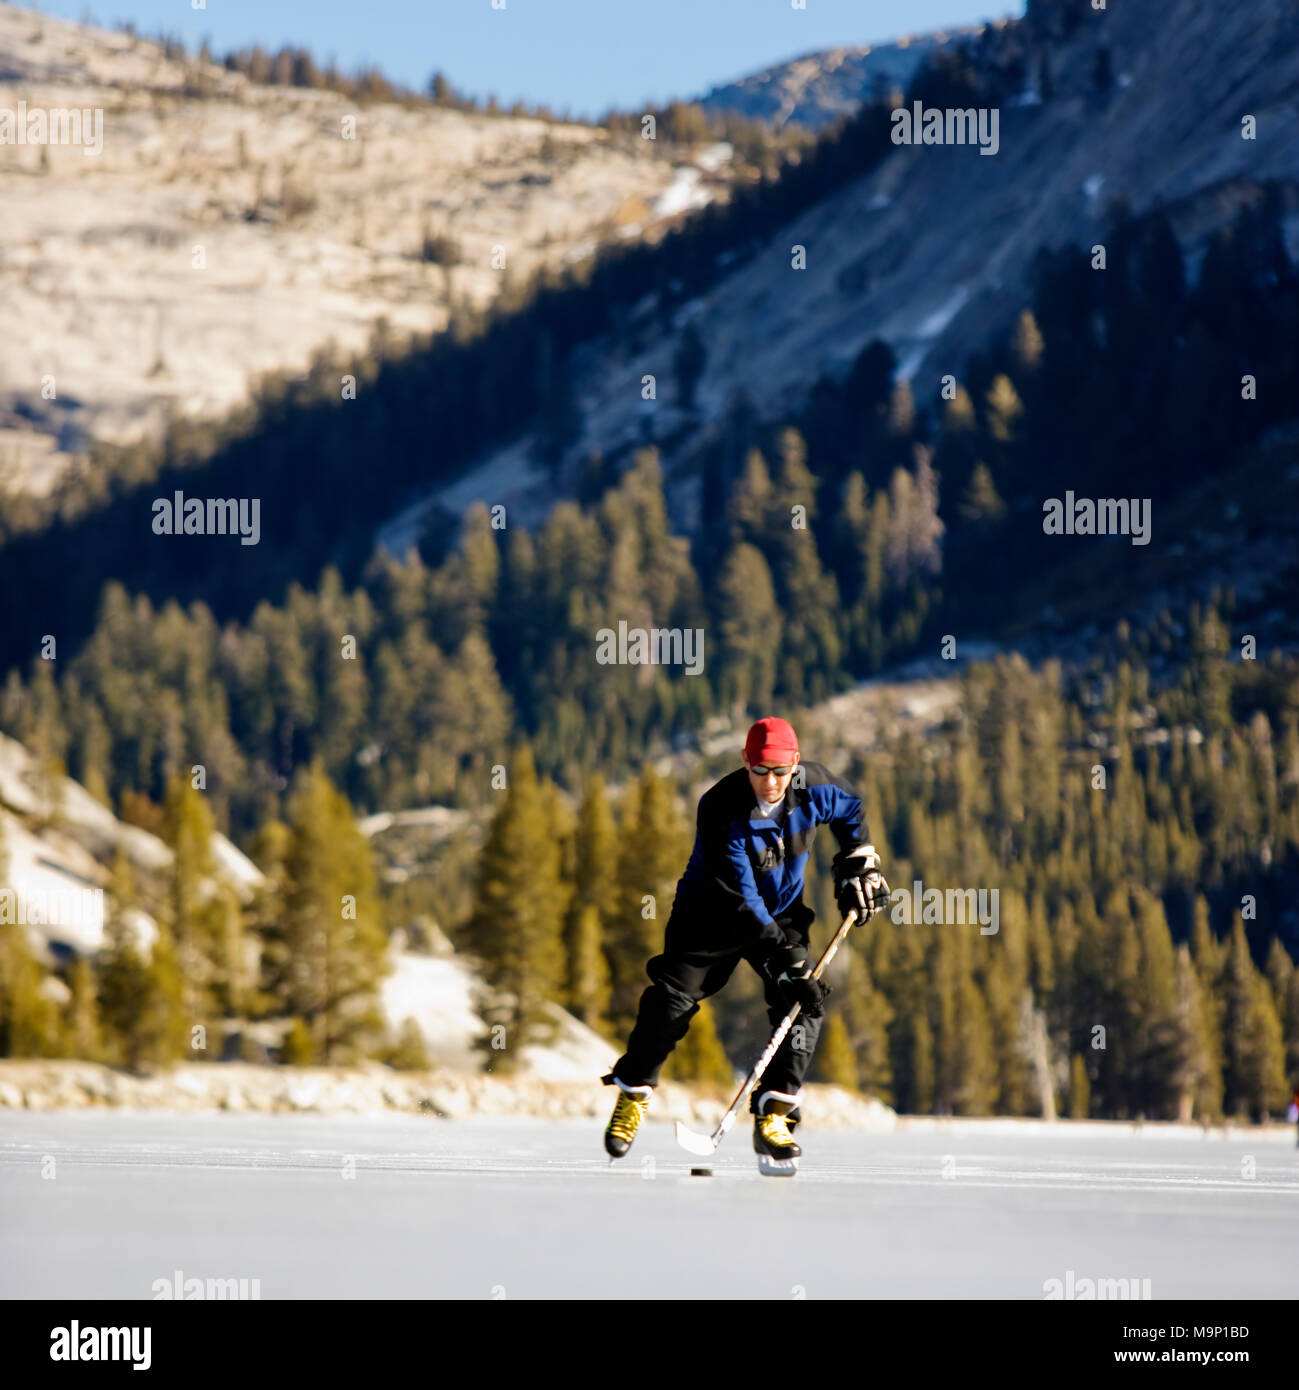 Low angle front view of a ice skater playing ice hockey on a snow free, frozen Tenaya Lake in Yosemite National Park. Stock Photo